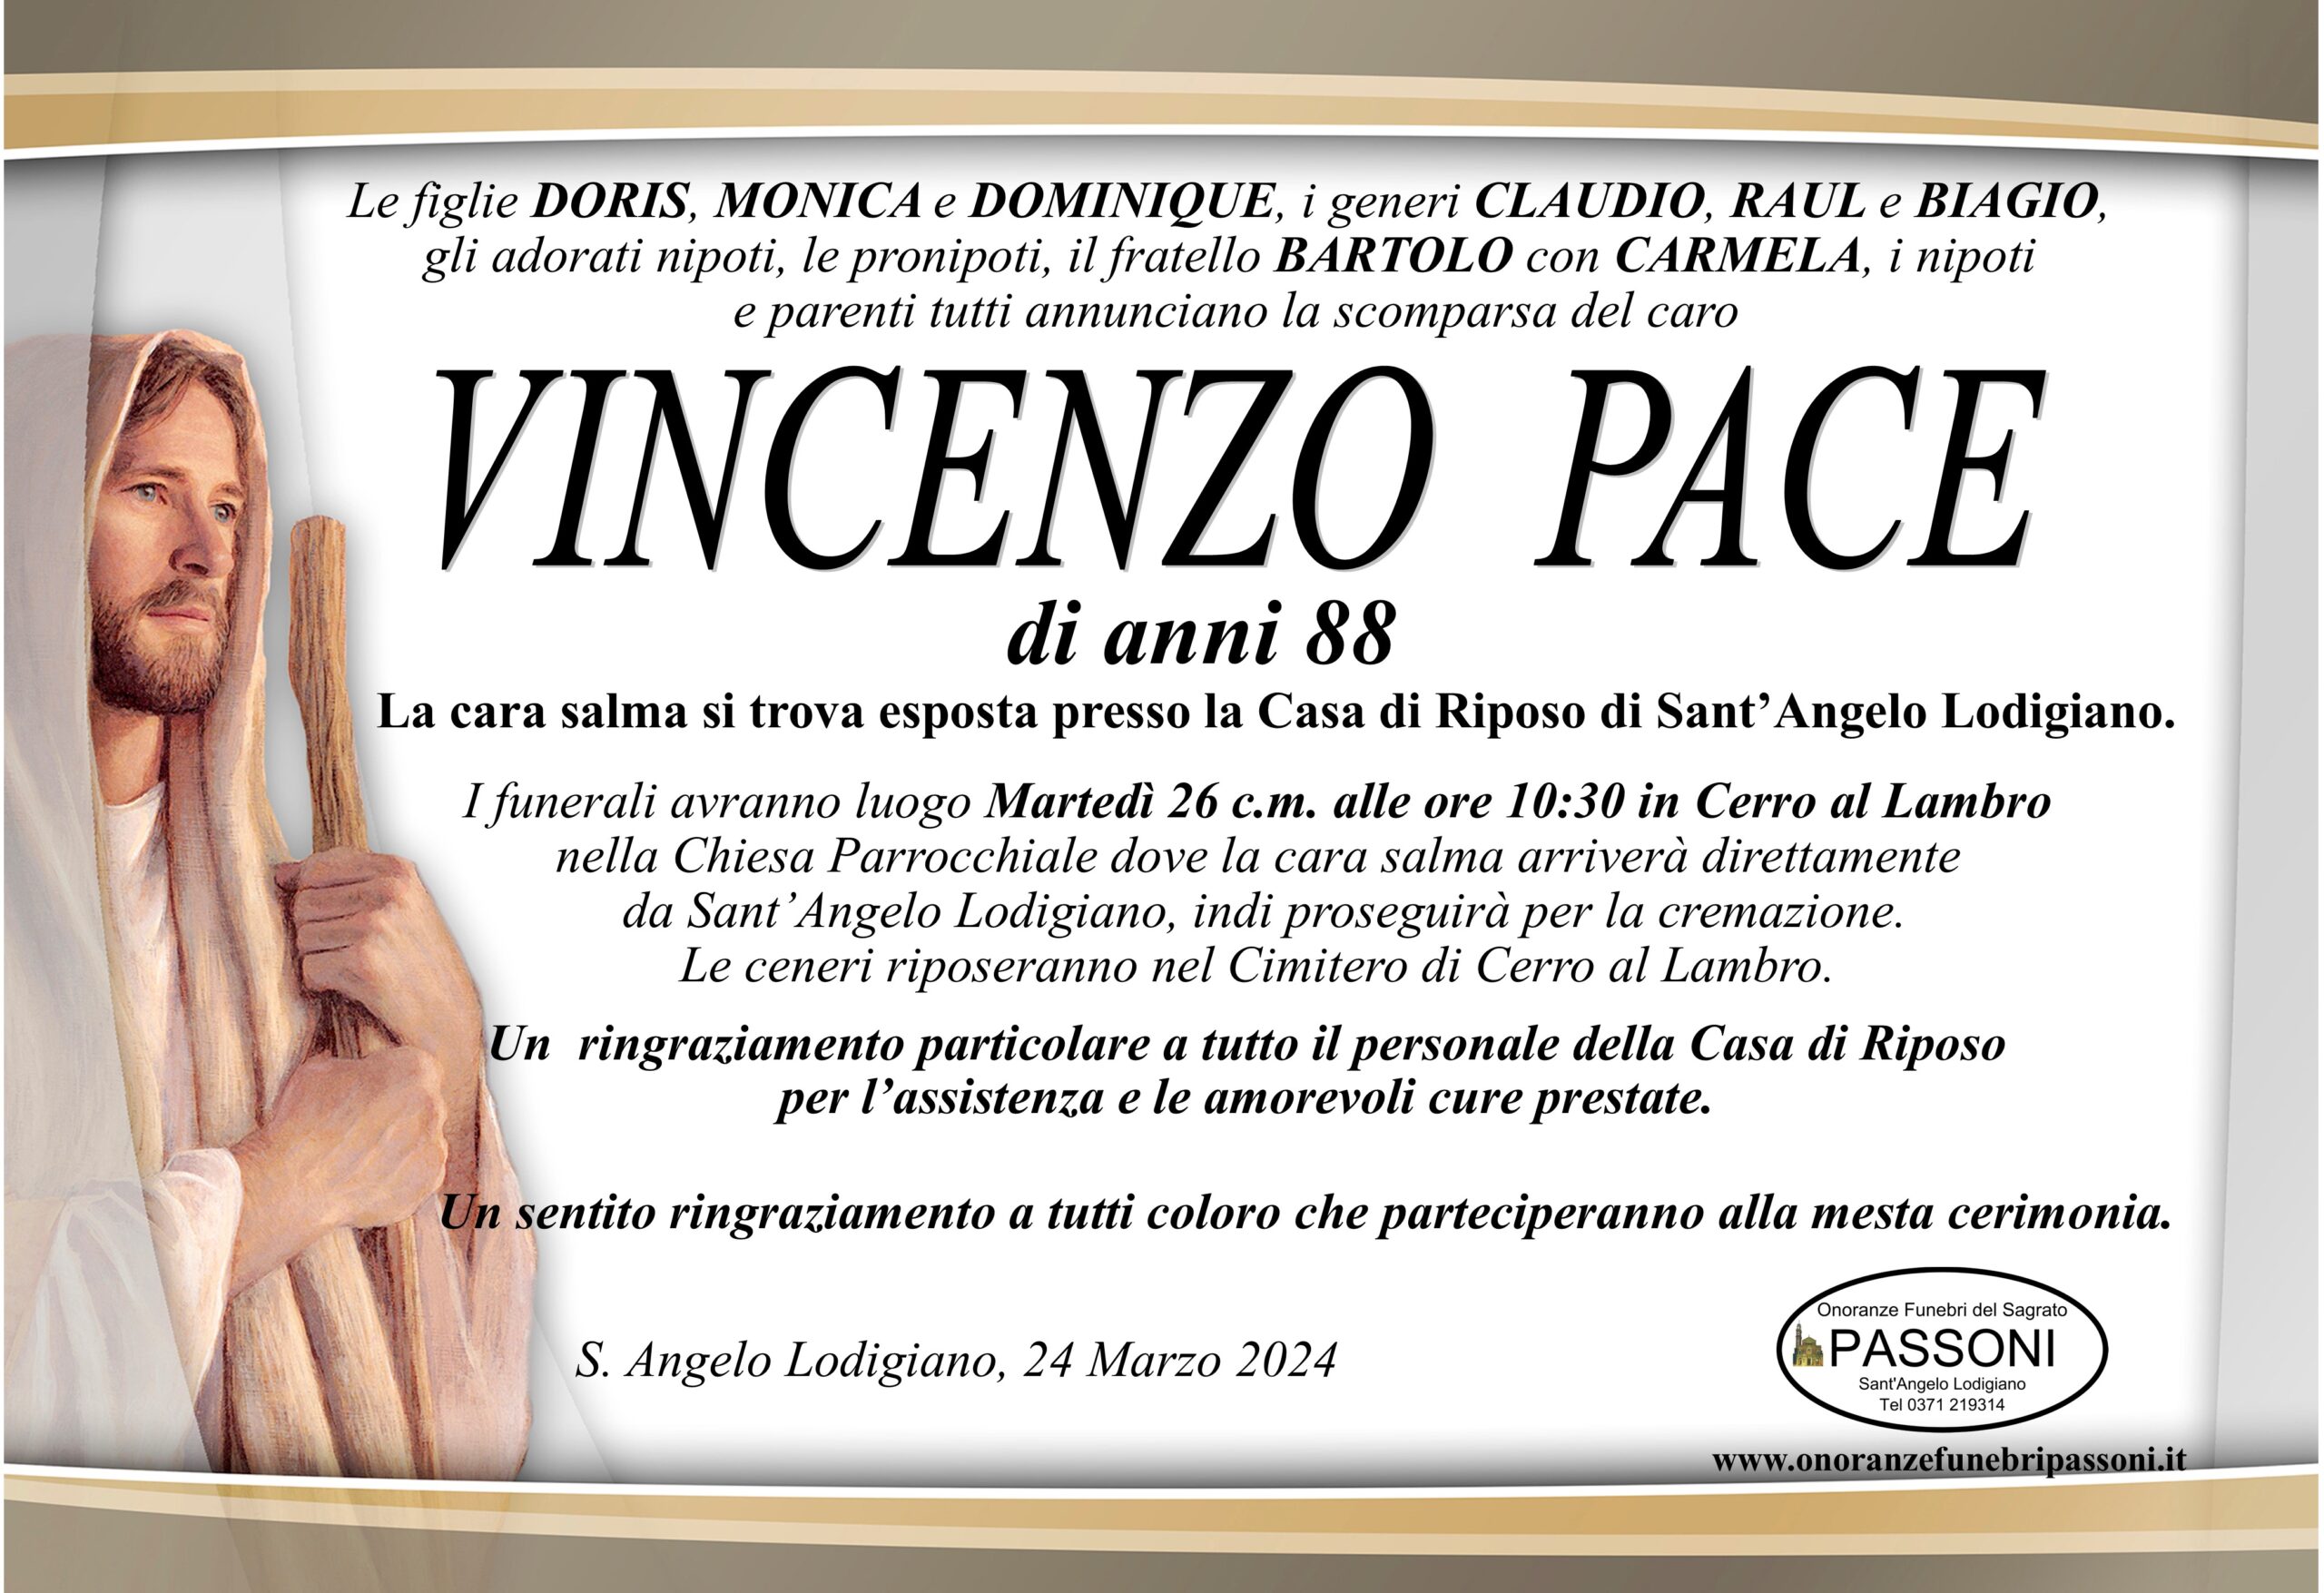 VINCENZO PACE